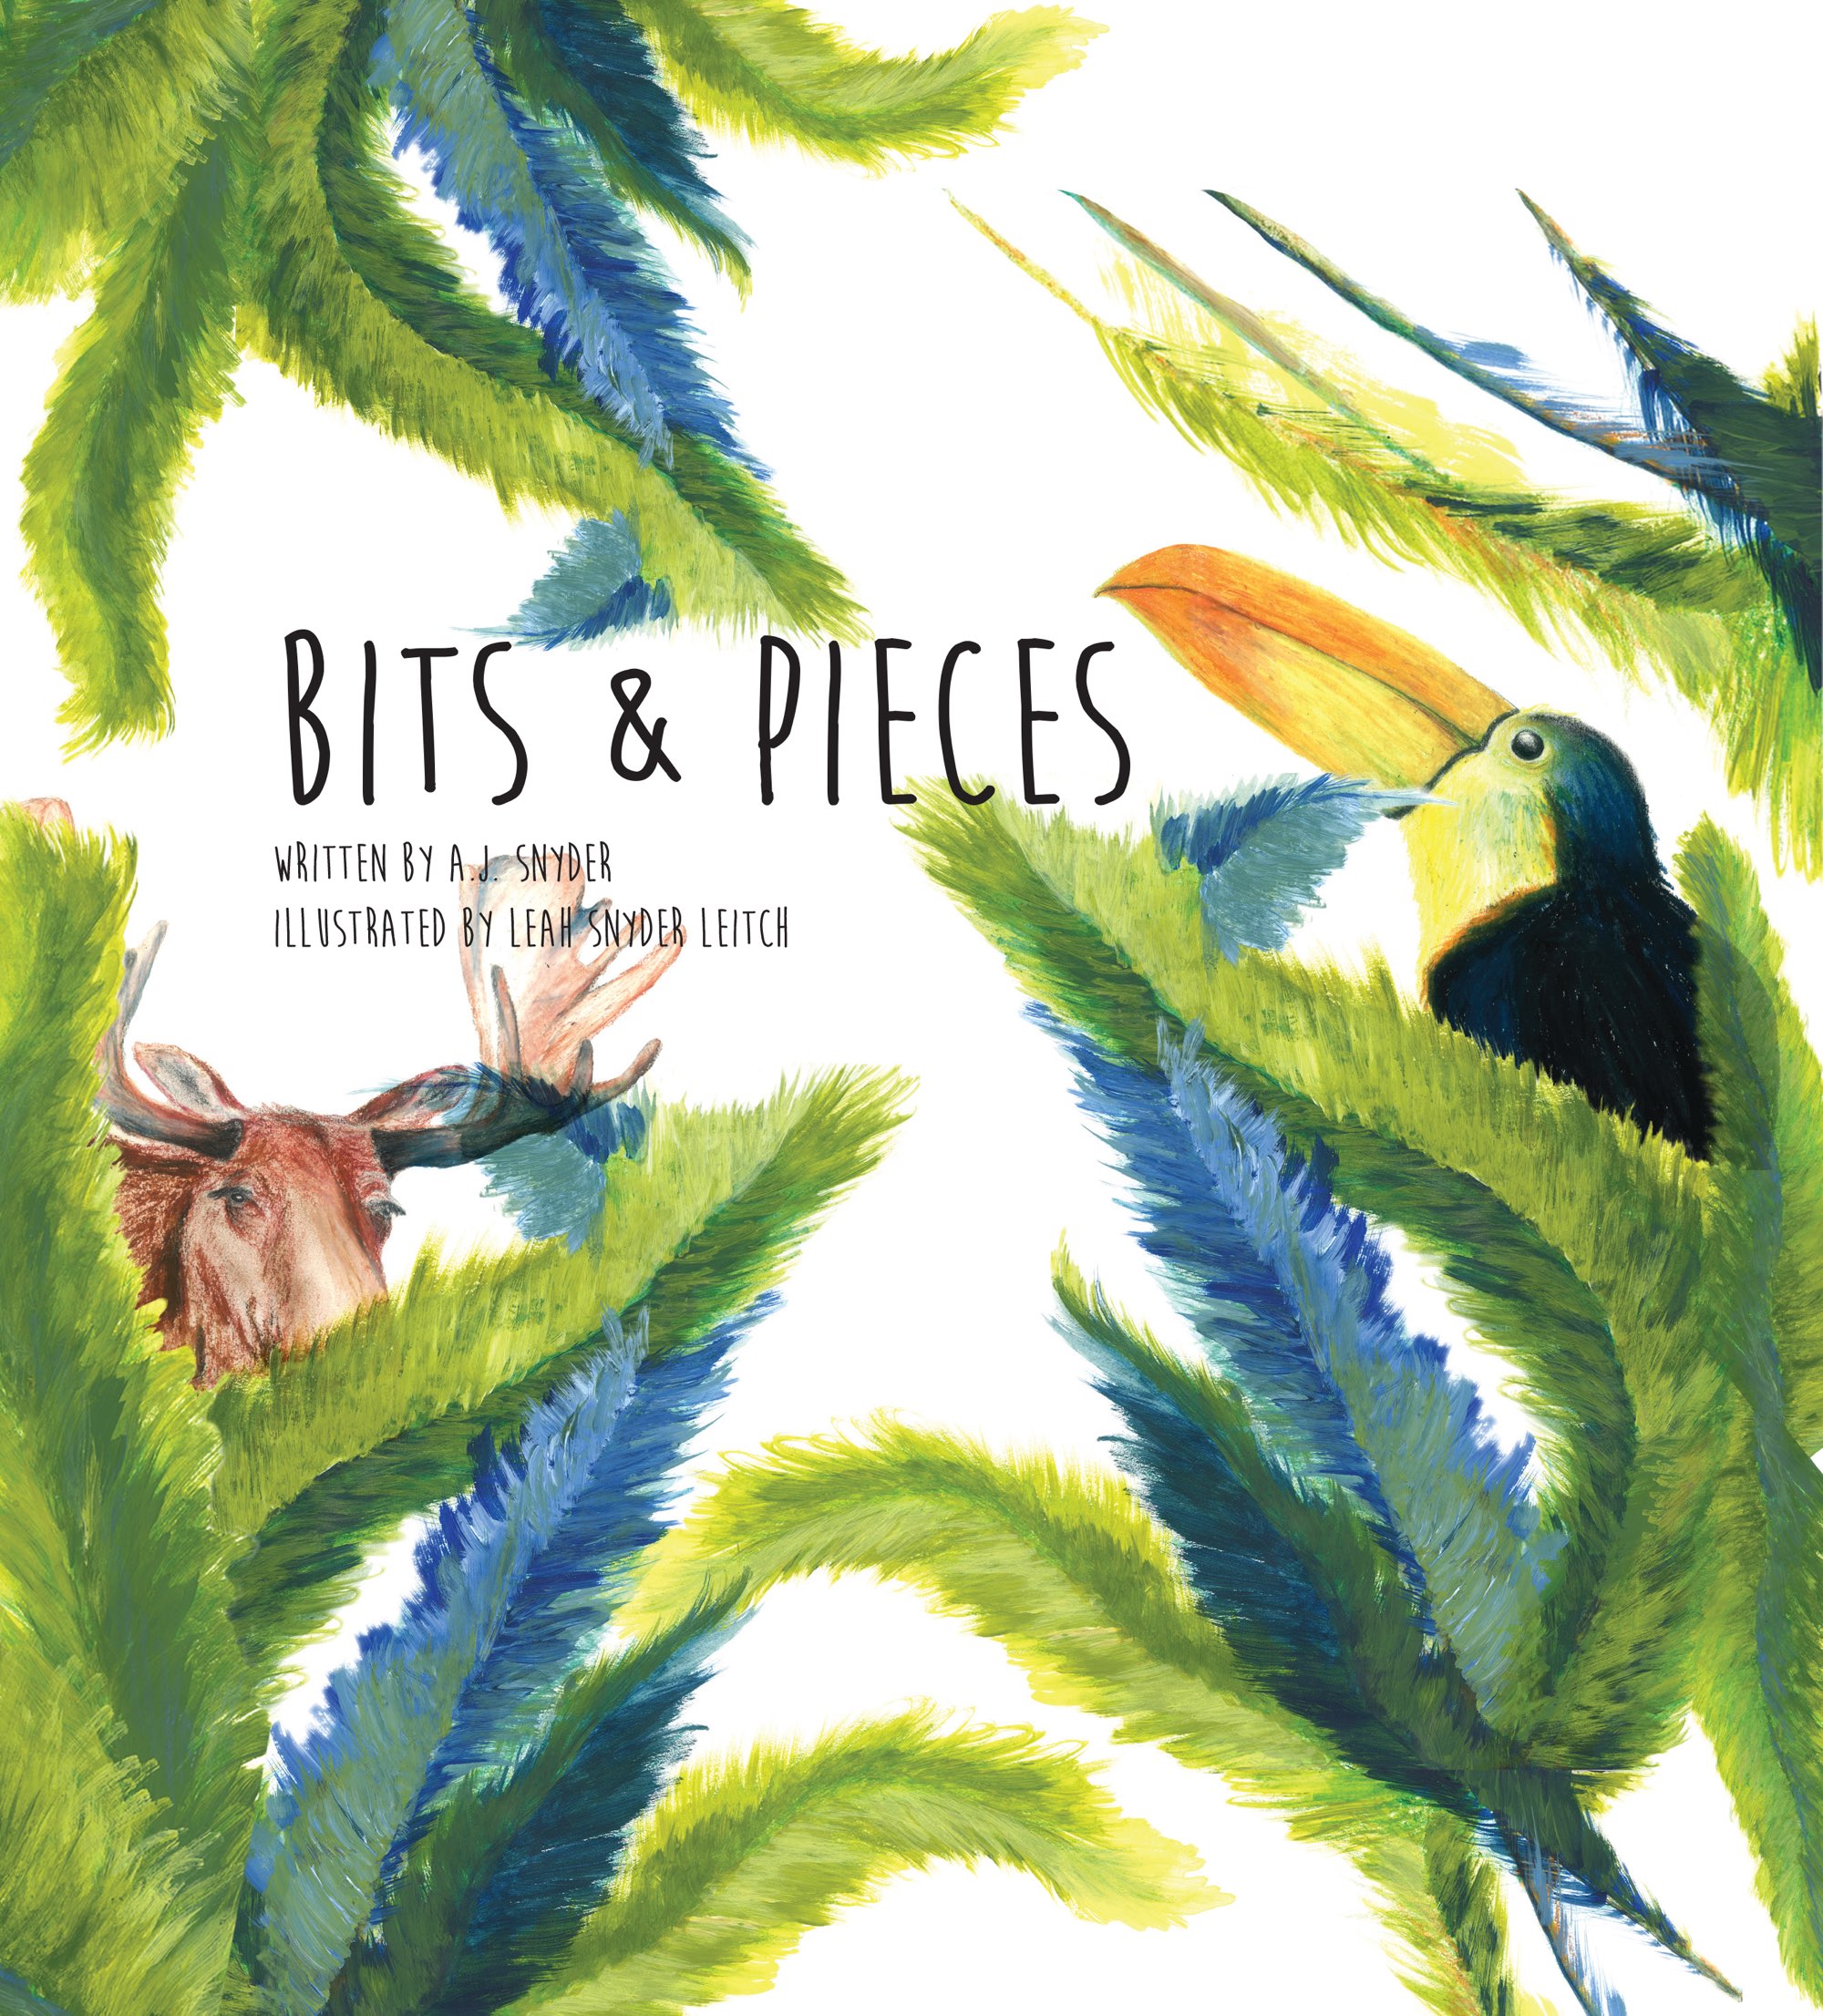 Bits & Pieces,by A.J. Snyder and illustrated by Leah Snyder Leitch.